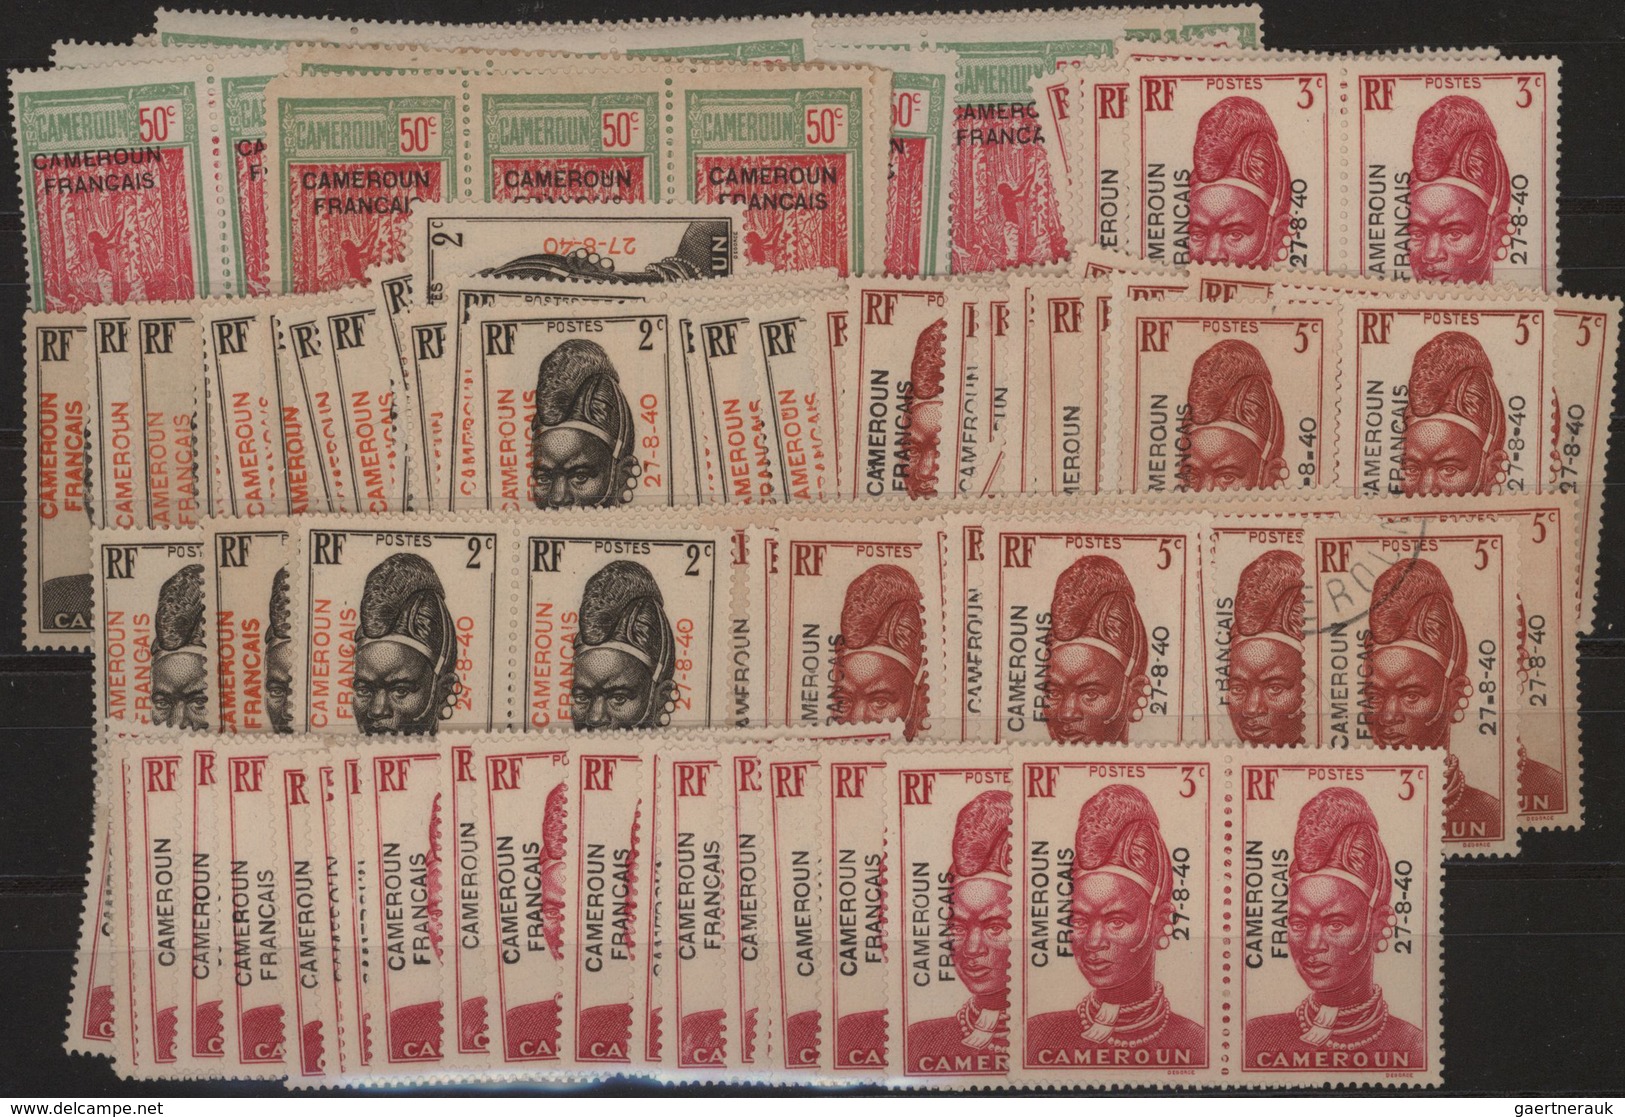 Kamerun: 1940, Yvert 202, 208-212 And 222 Overprint Issues: Approximately 600 Stamps Mainly Unused, - Kameroen (1960-...)